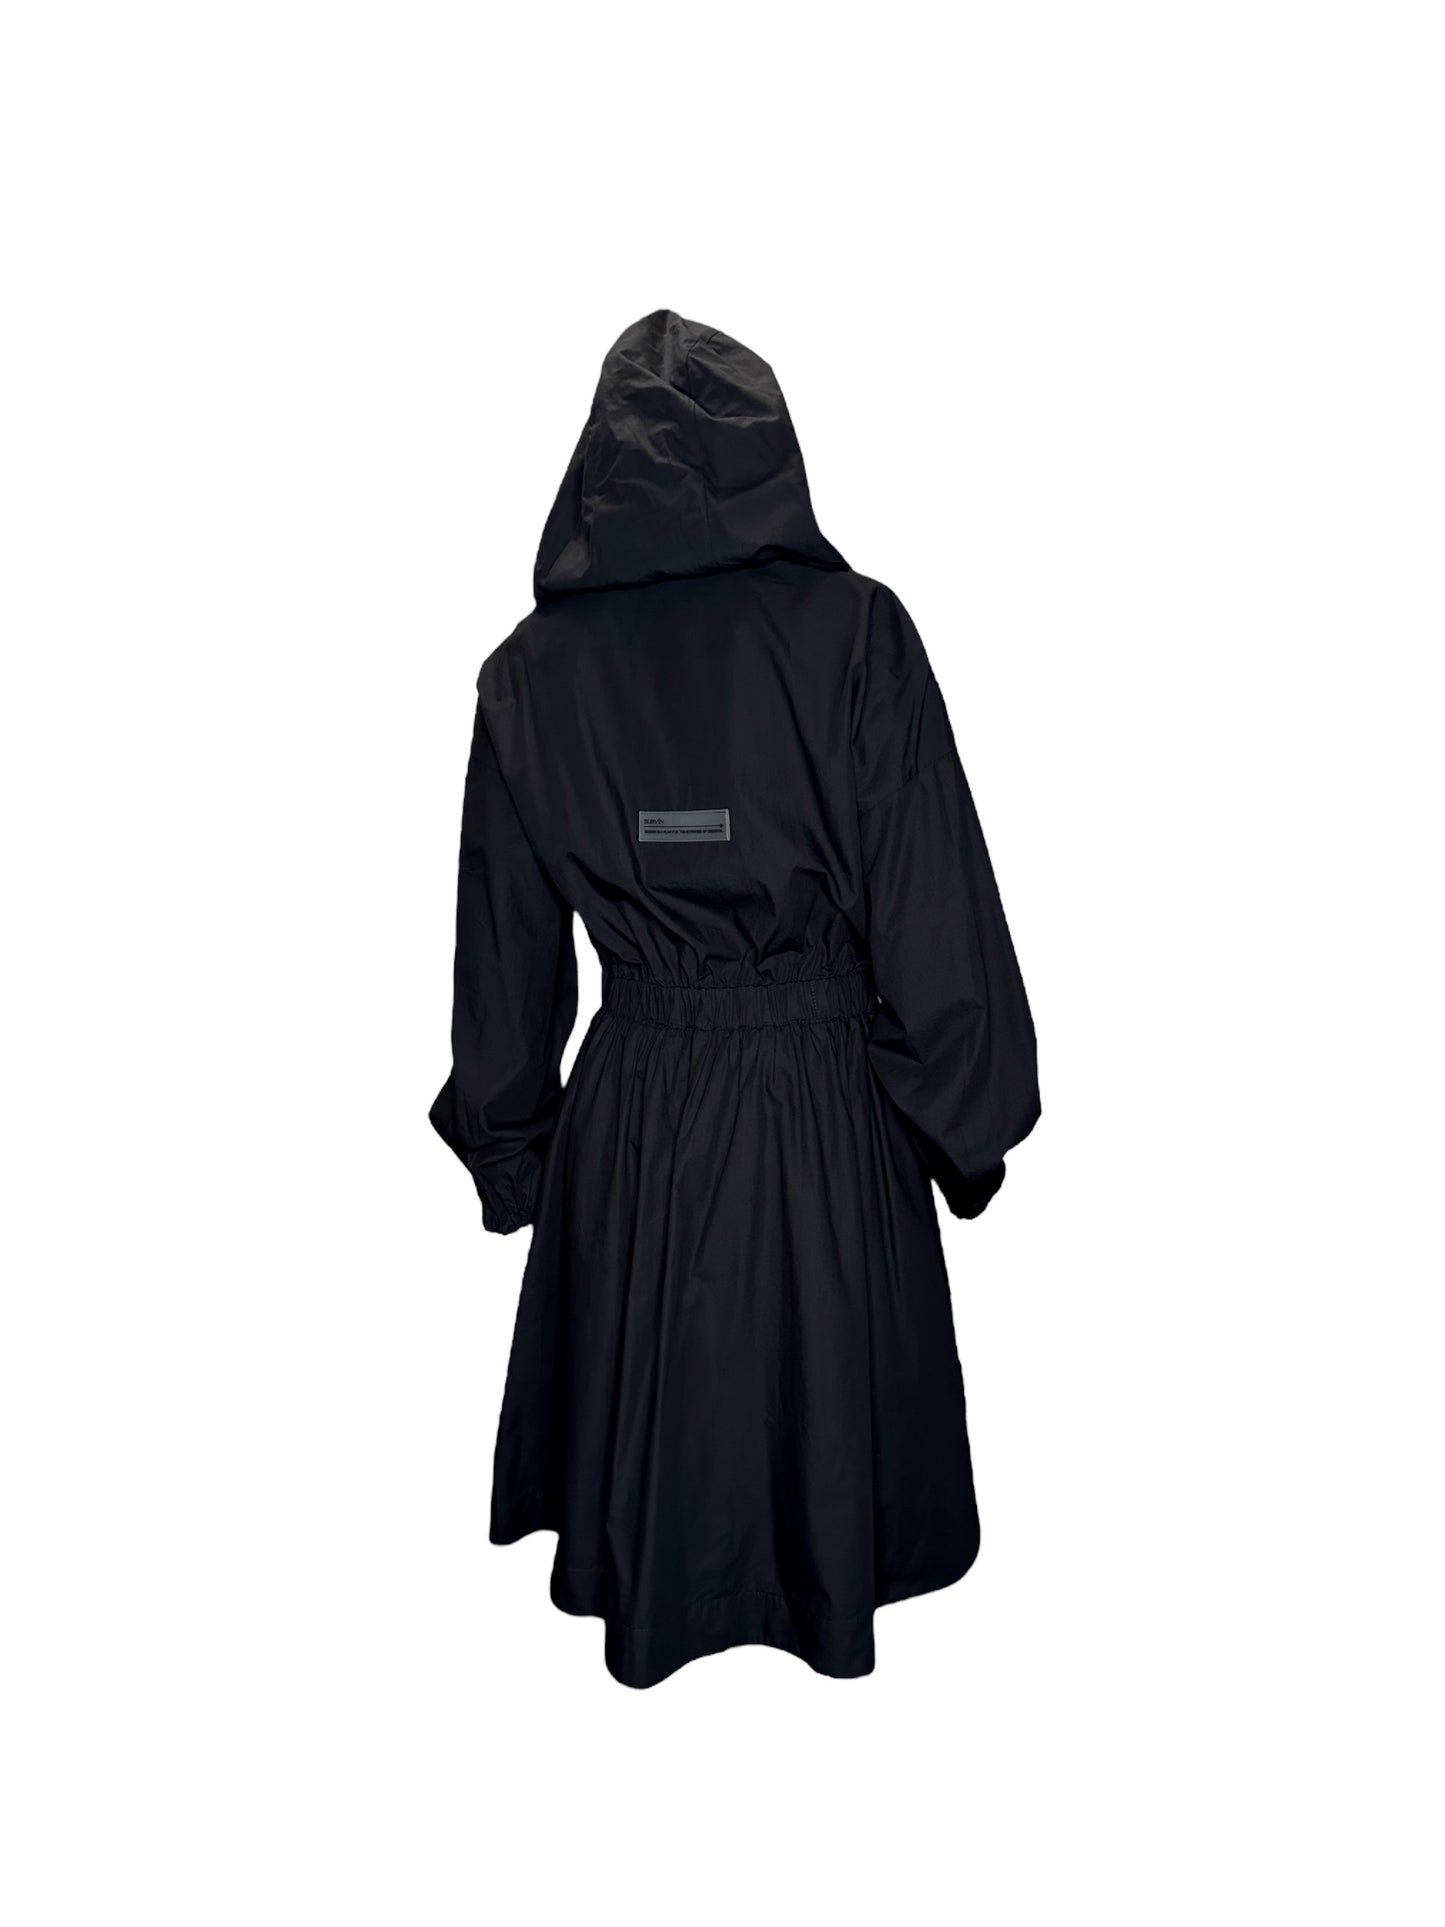 Hooded Long Sleeve Dress with Pockets